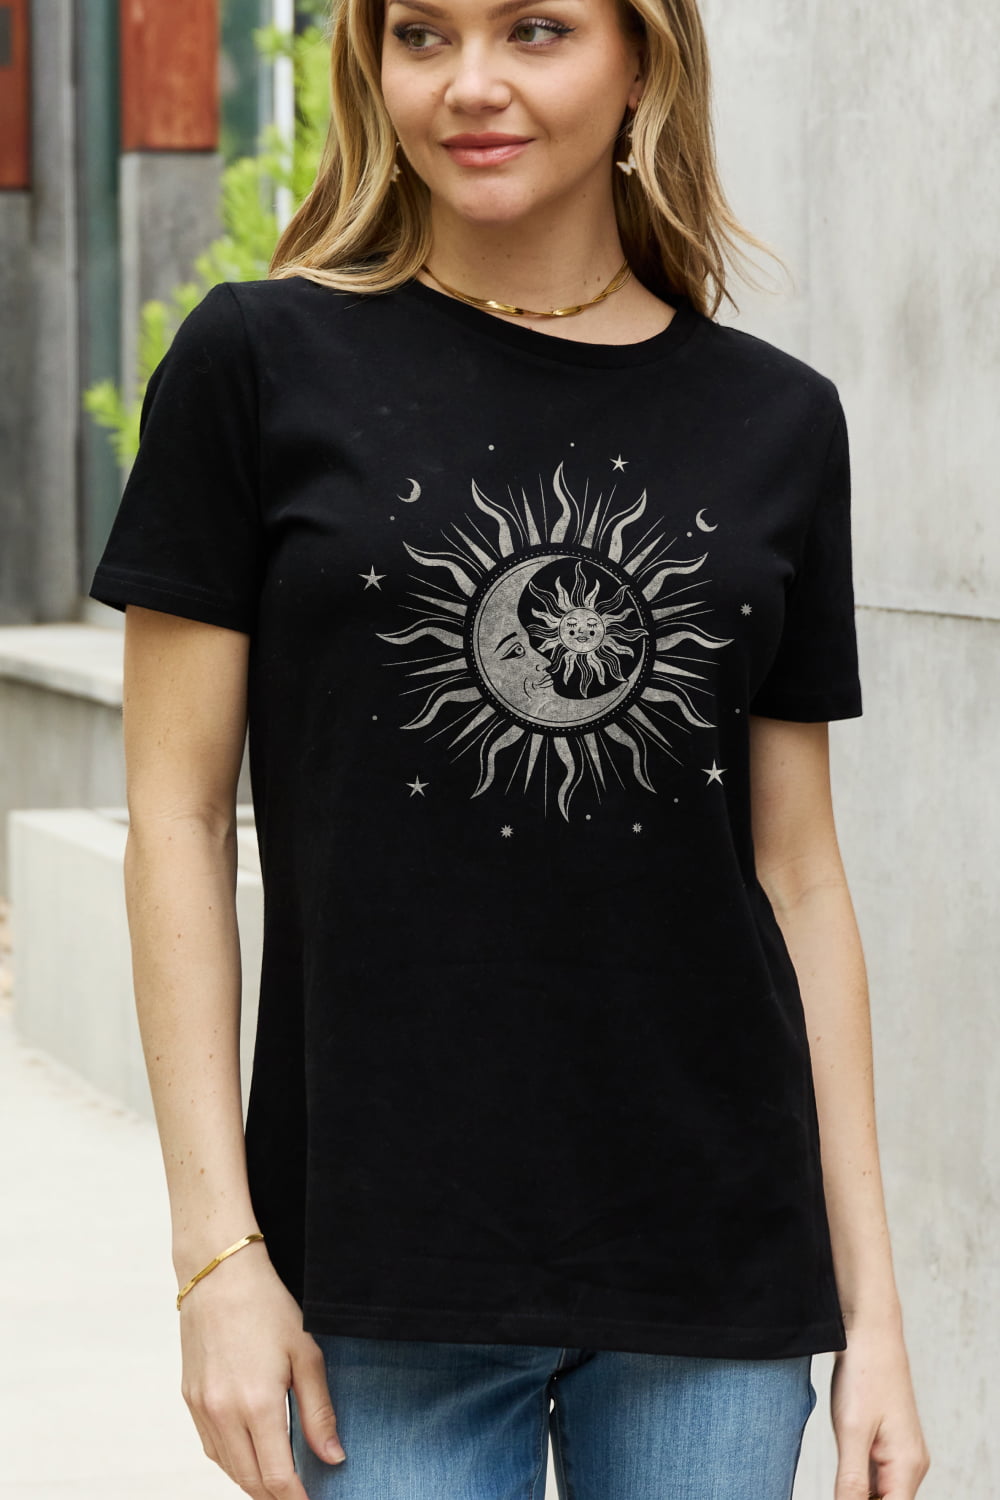 Sun, Moon, and Star Graphic Cotton Tee